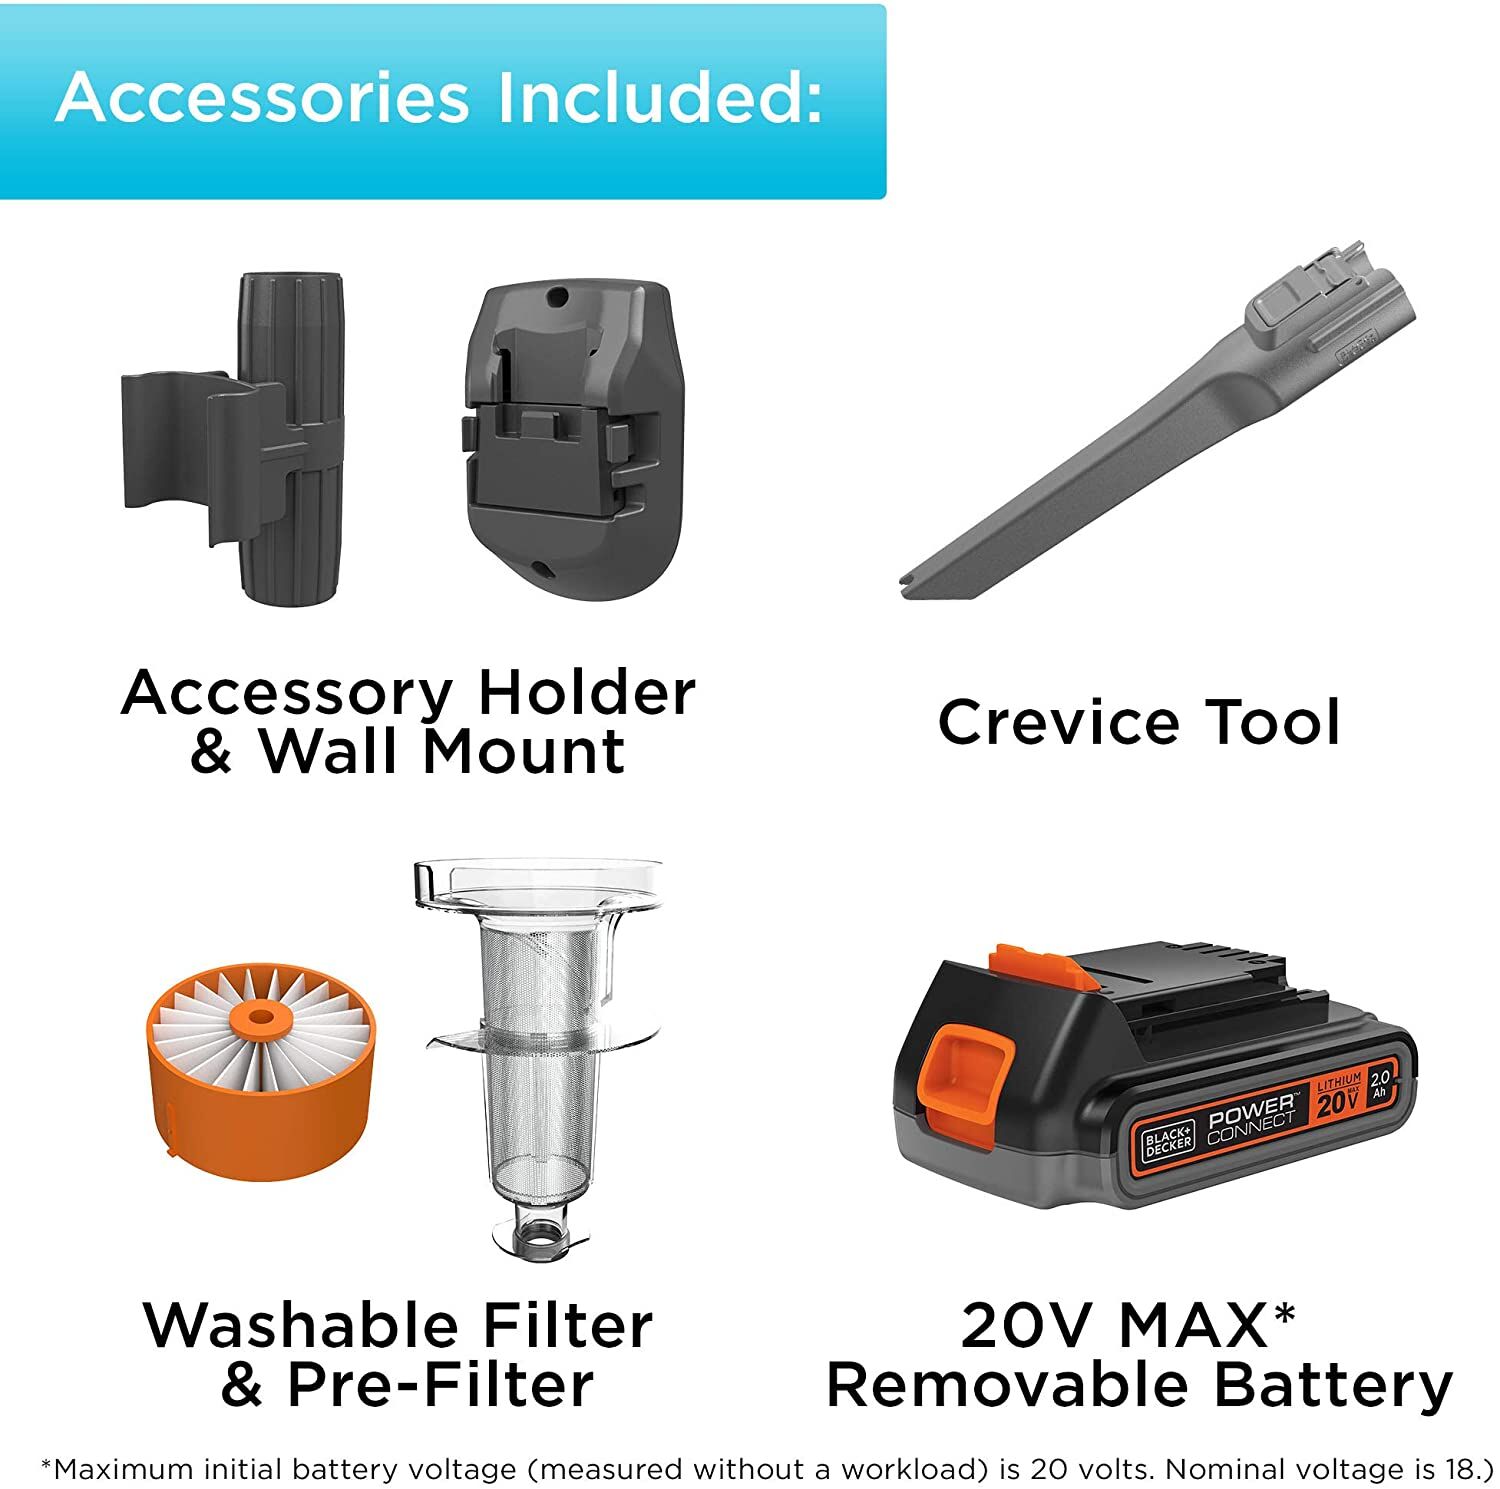 Accessories included with the Black and Decker Power series extreme 20 volt max stick vacuum include accessory holder, wall mount, crevice tool, washable filter & pre-filter, and 20 volt MAX* removable battery